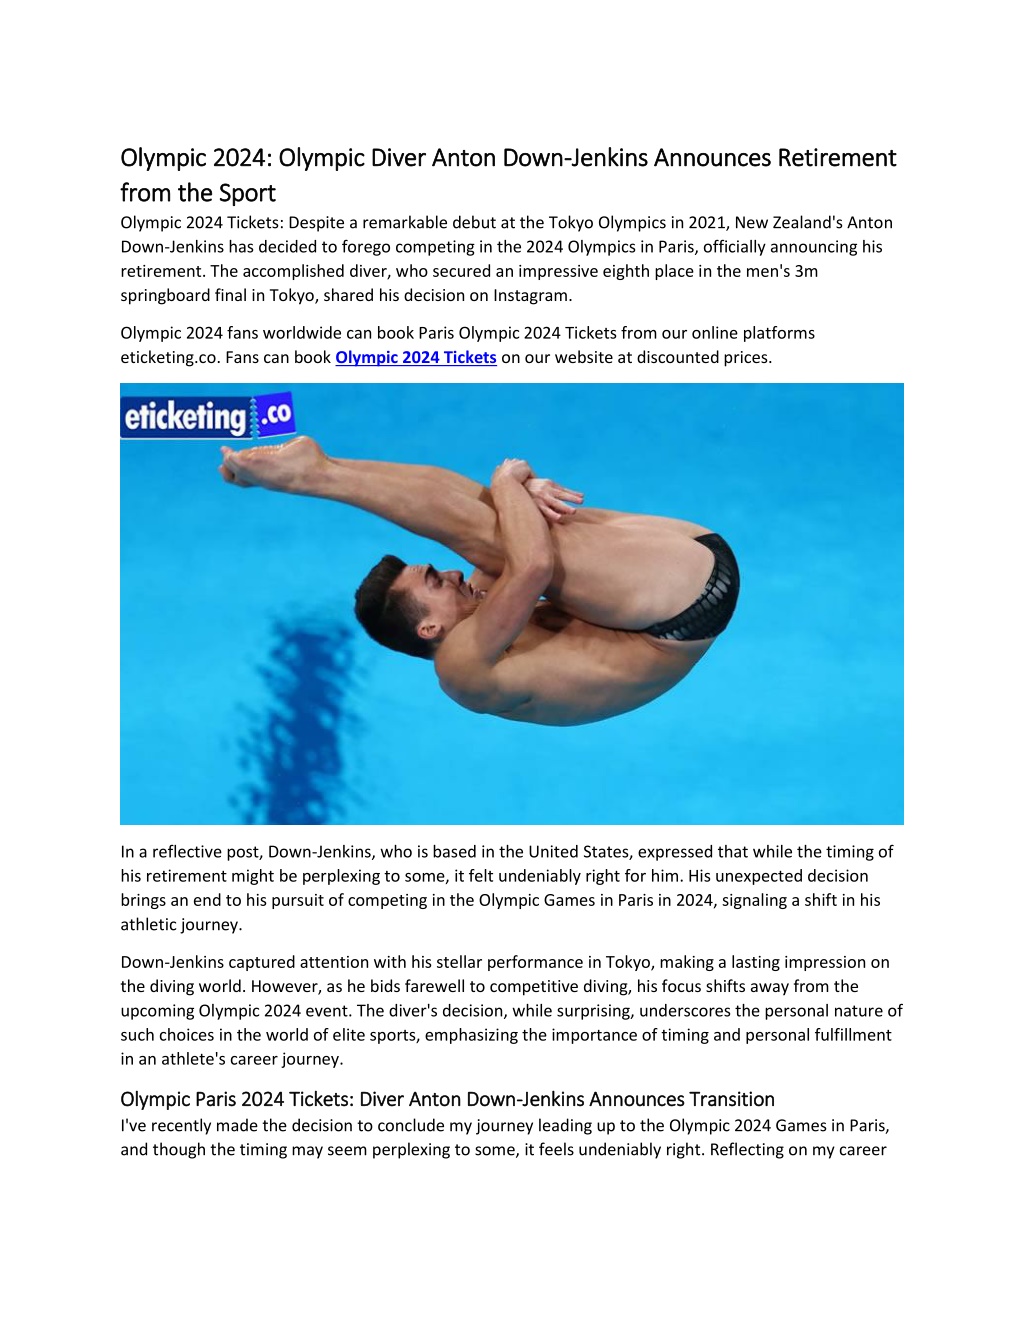 PPT Olympic 2024 Olympic Diver Anton DownJenkins Announces